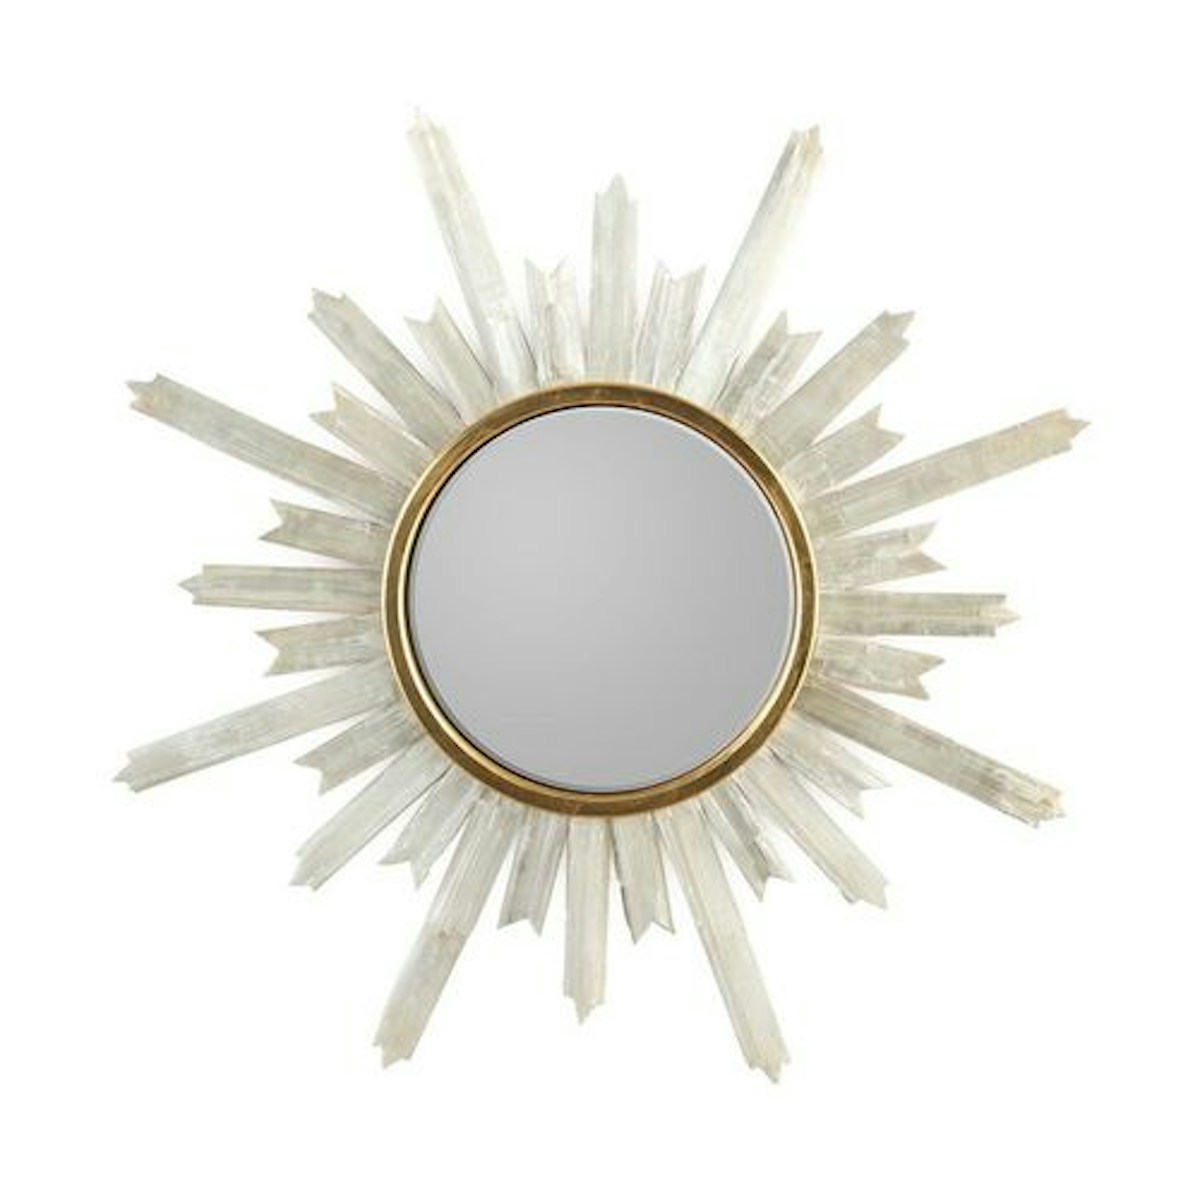 Selenite Starburst Mirror - 9 Best Statement Wall Mirrors To Hang In Your Home - LuxDeco.com